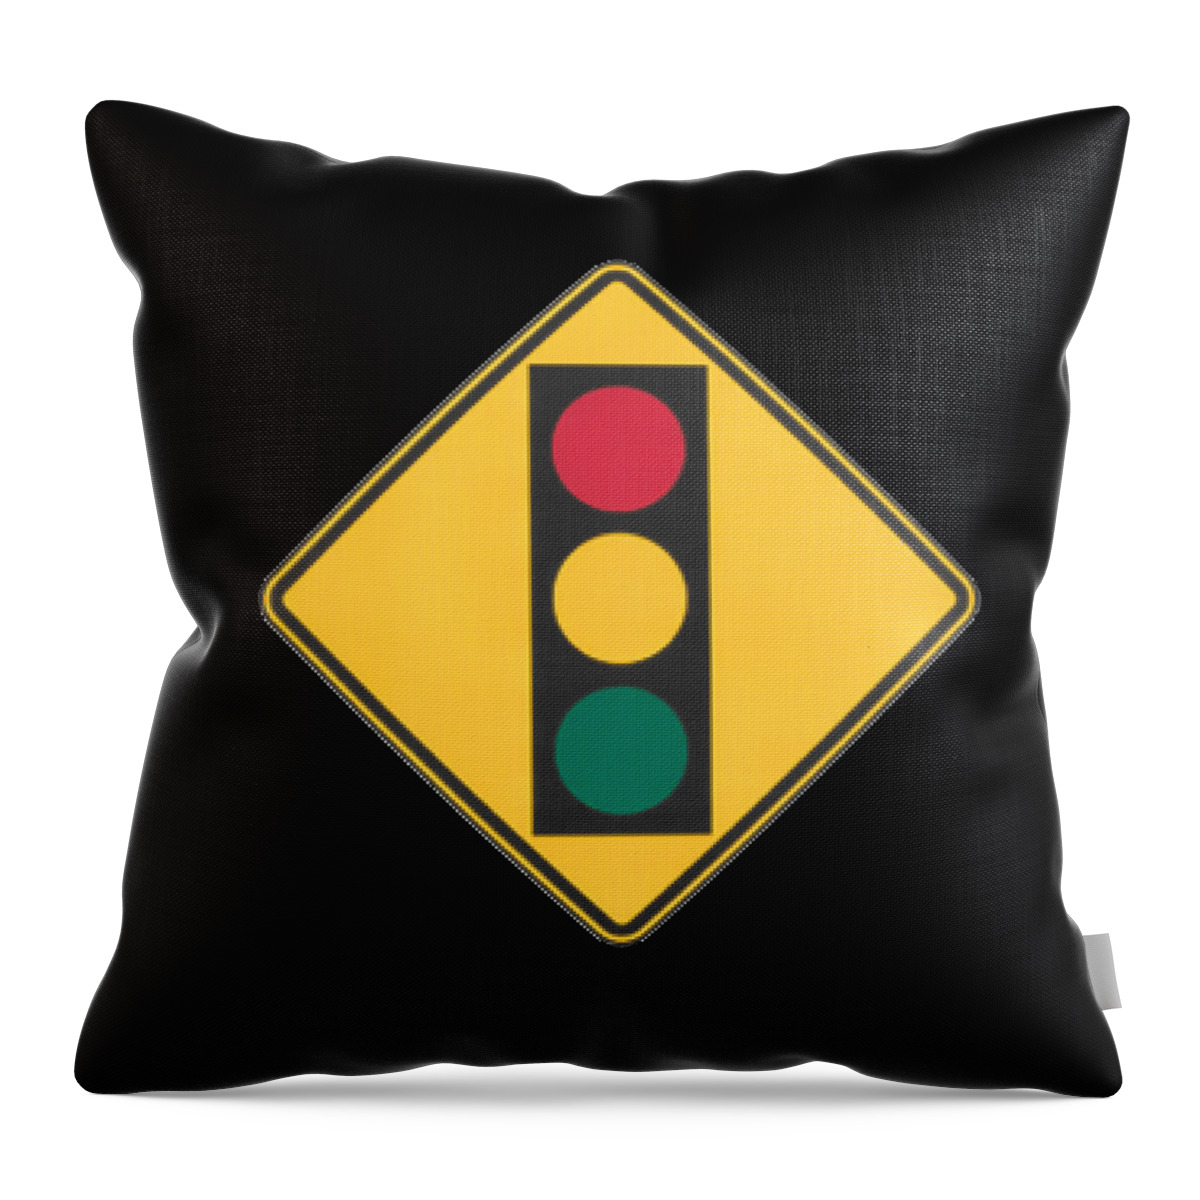 Signs Throw Pillow featuring the painting Traffic Light T-shirt by Herb Strobino